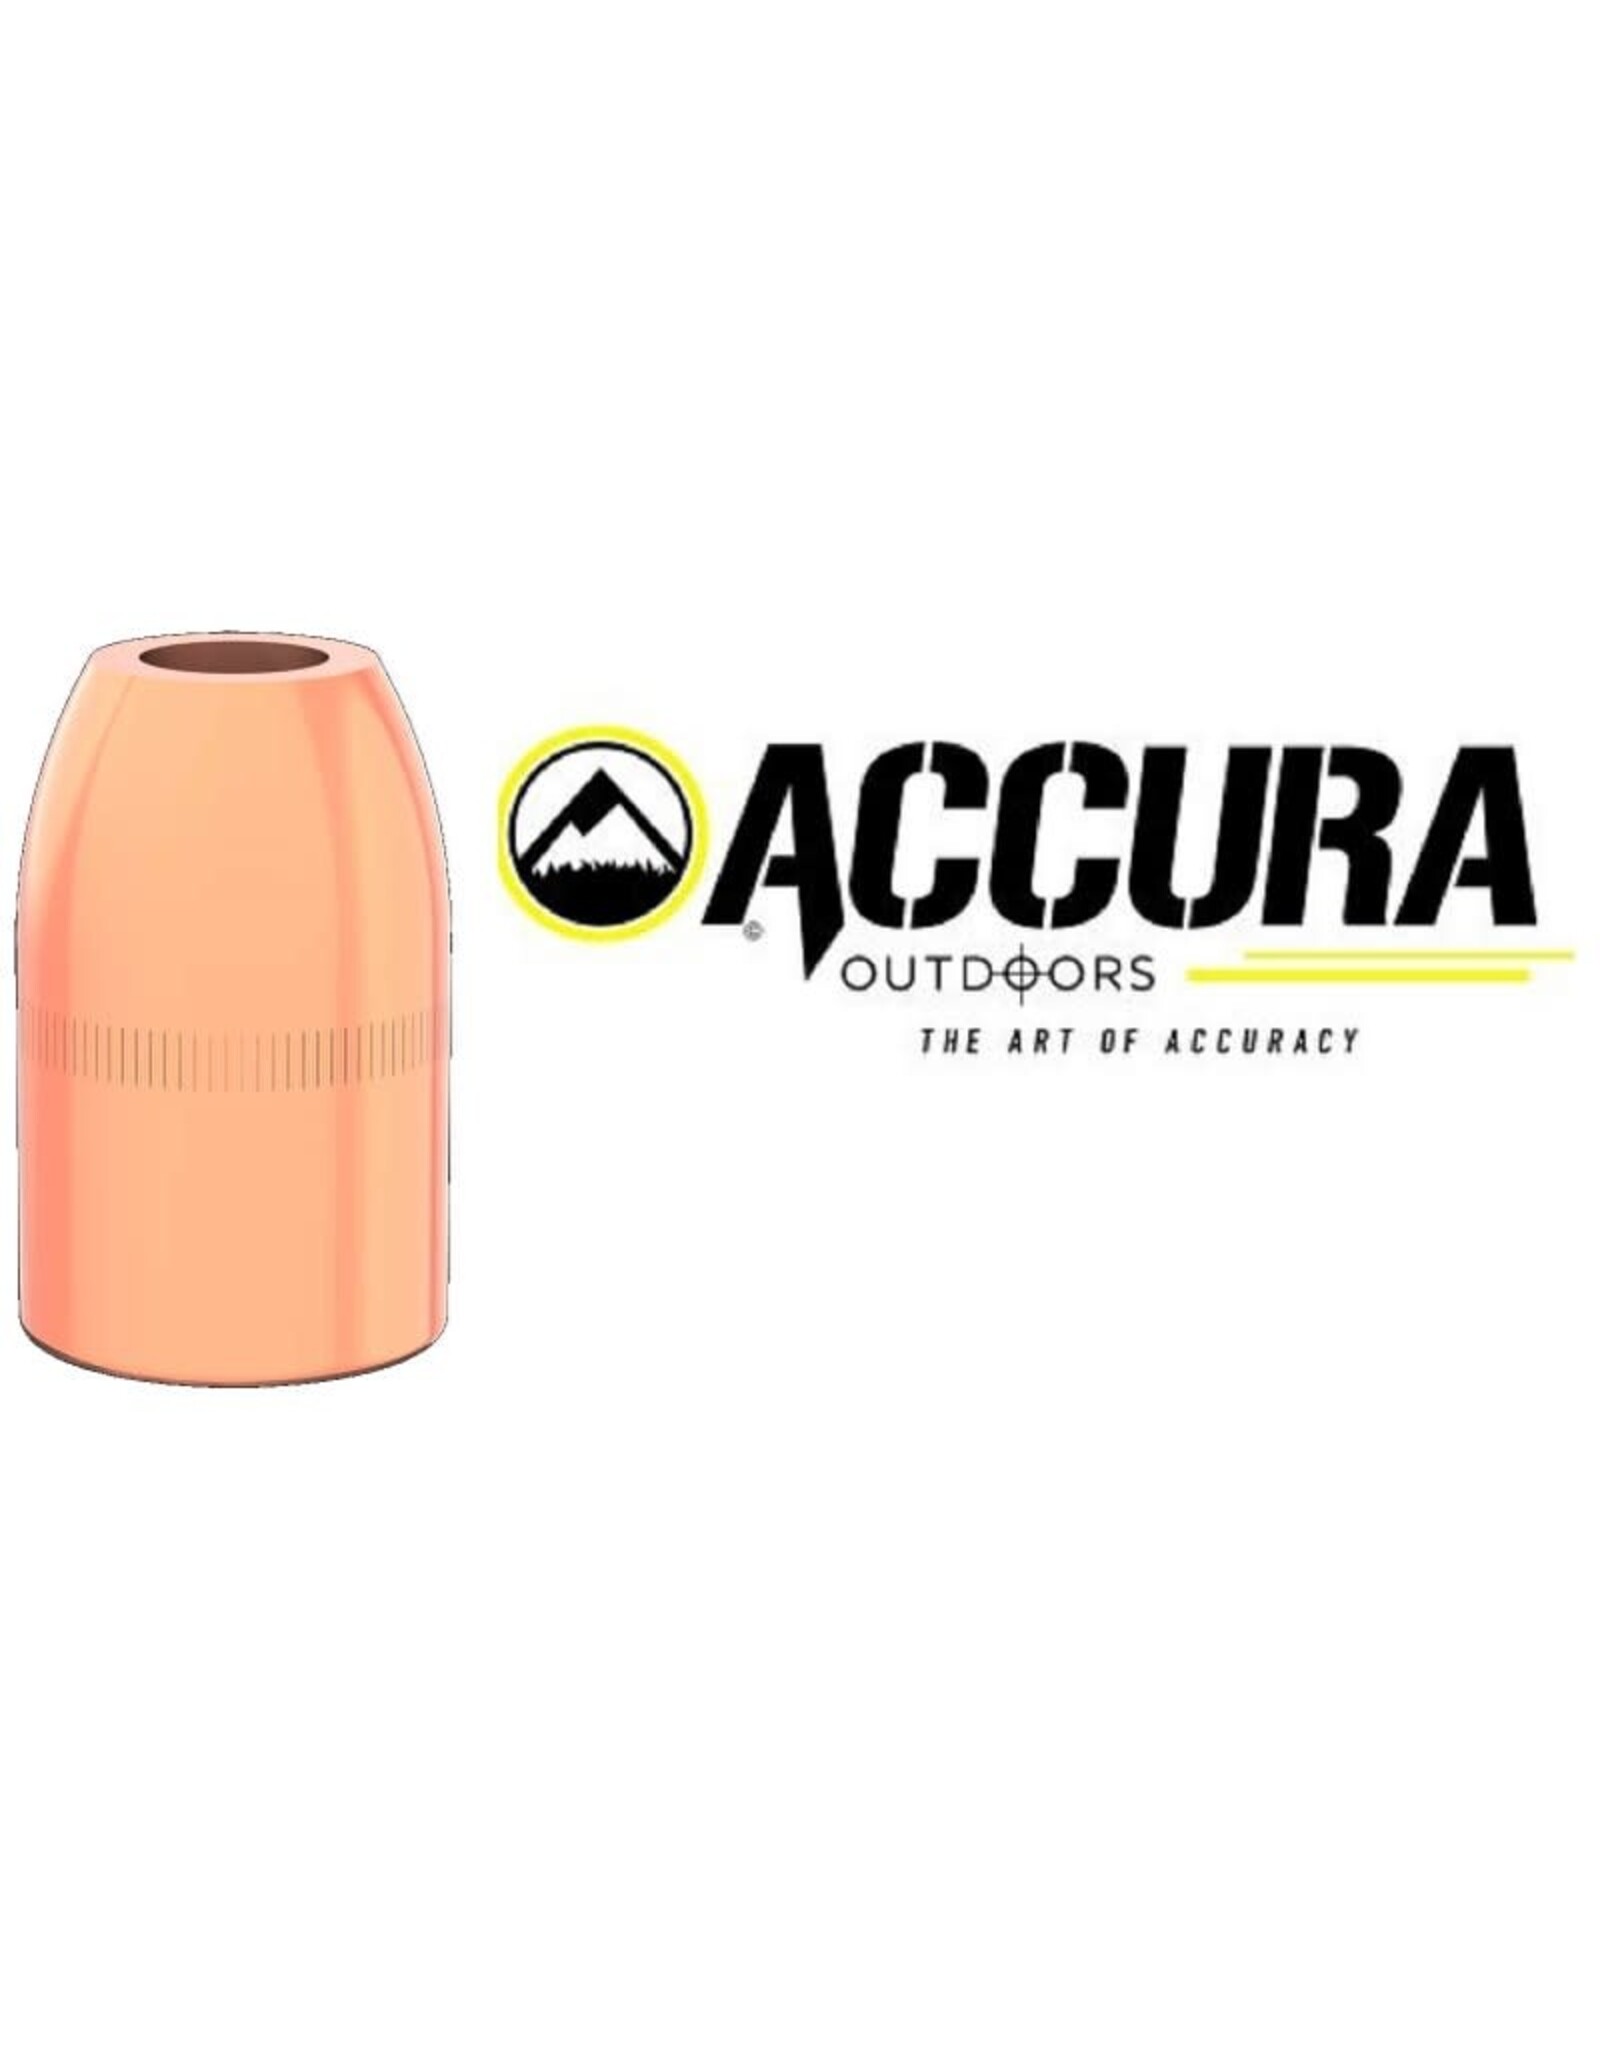 Accura Accura Bullets .44 Cal 240 GR Hollow Point (.430") - 500 Count